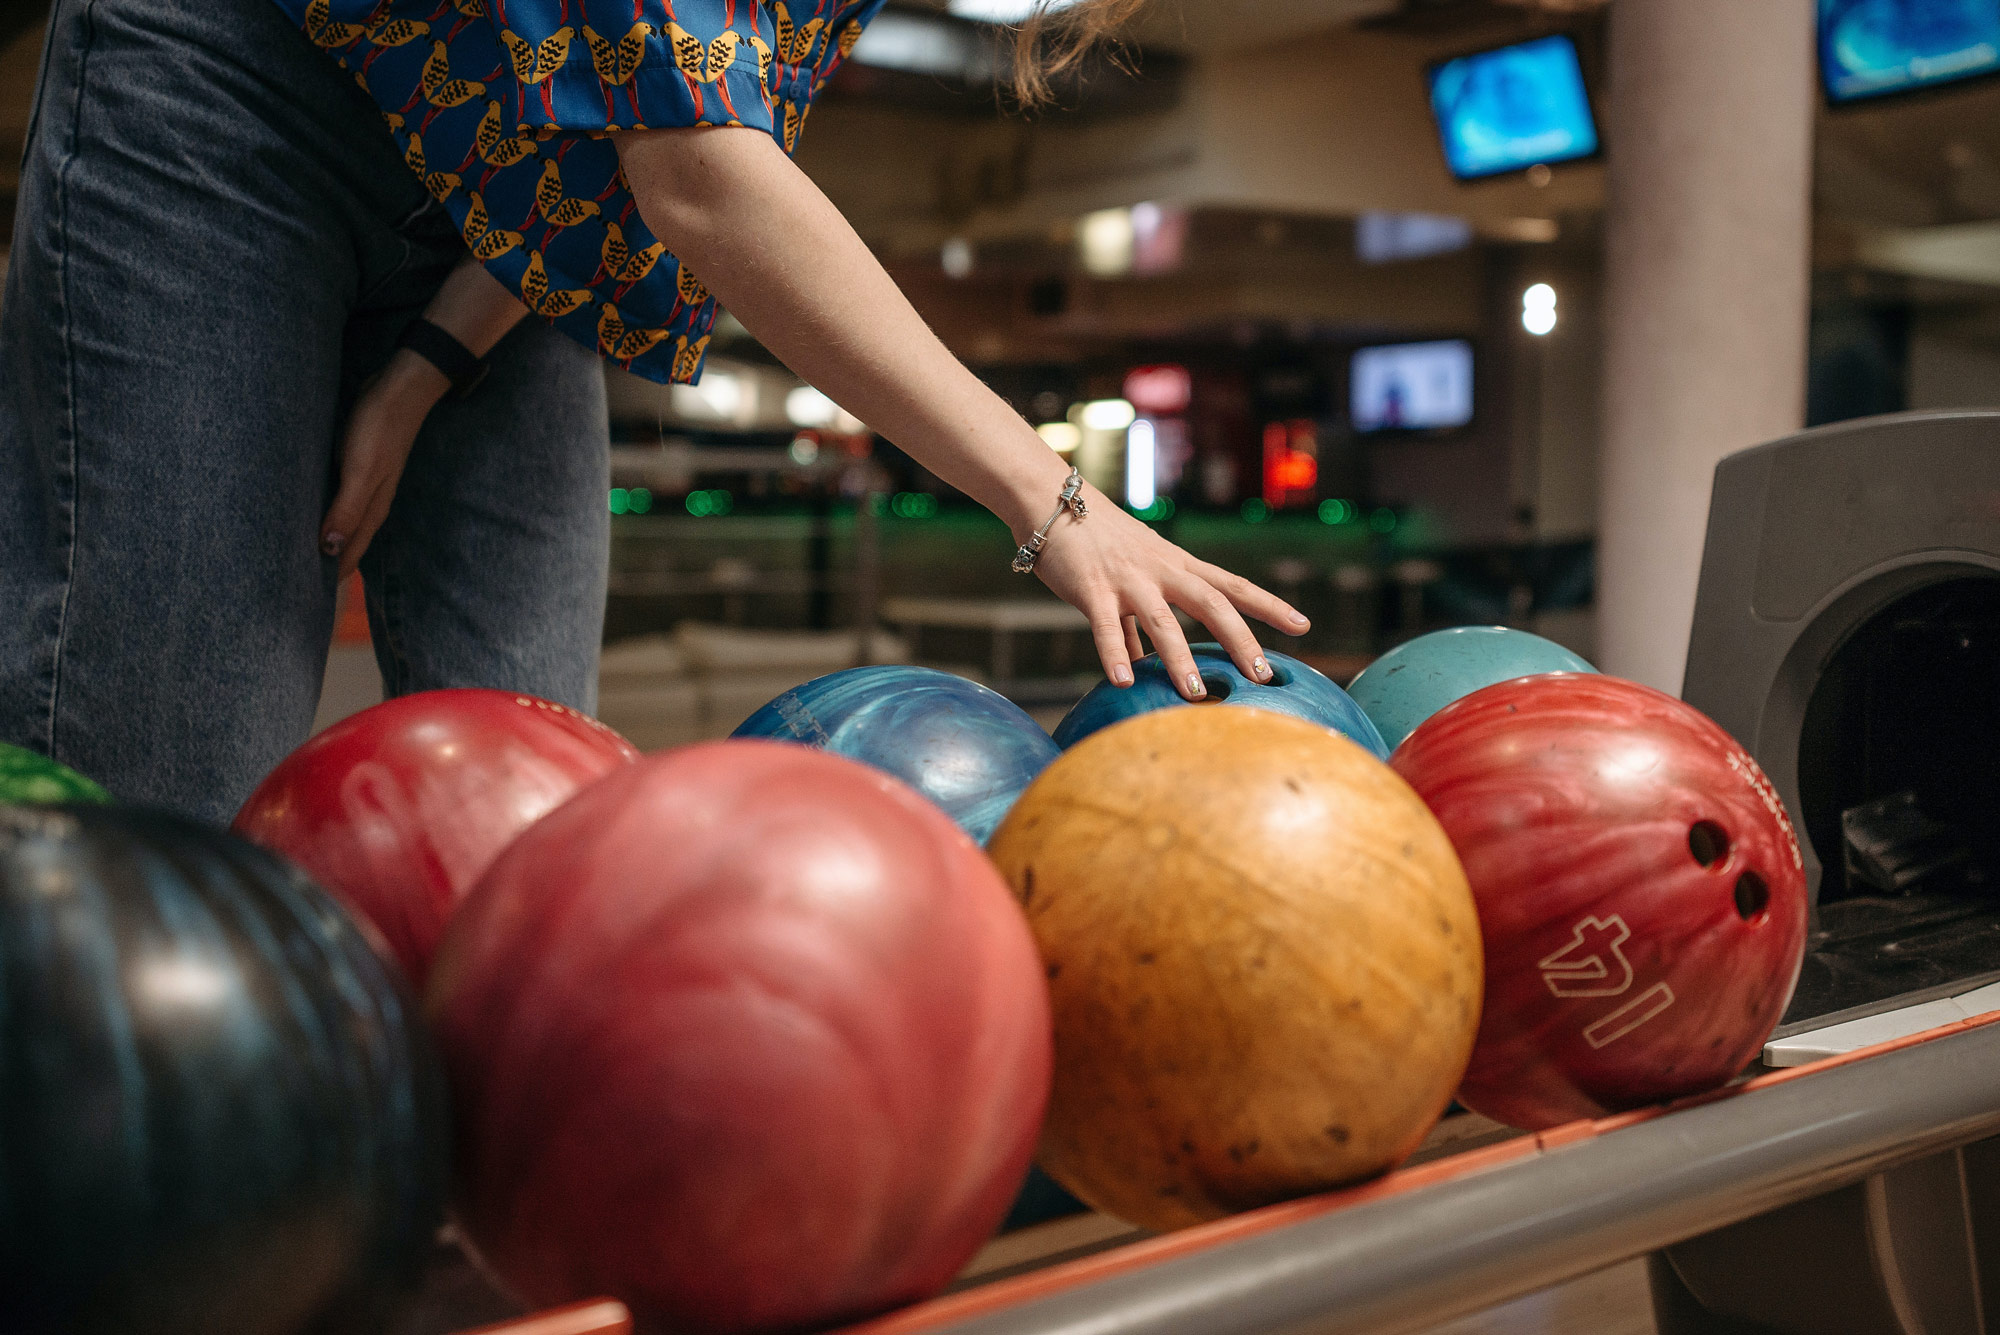 Village Lanes Bowling: Throw a strike at Village Lanes Bowling. Party packages, league bowling, family friendly public bowling, and the new Golf Simulator for golf enthusiasts. Enjoy snacks, hot eats and refreshments in […]